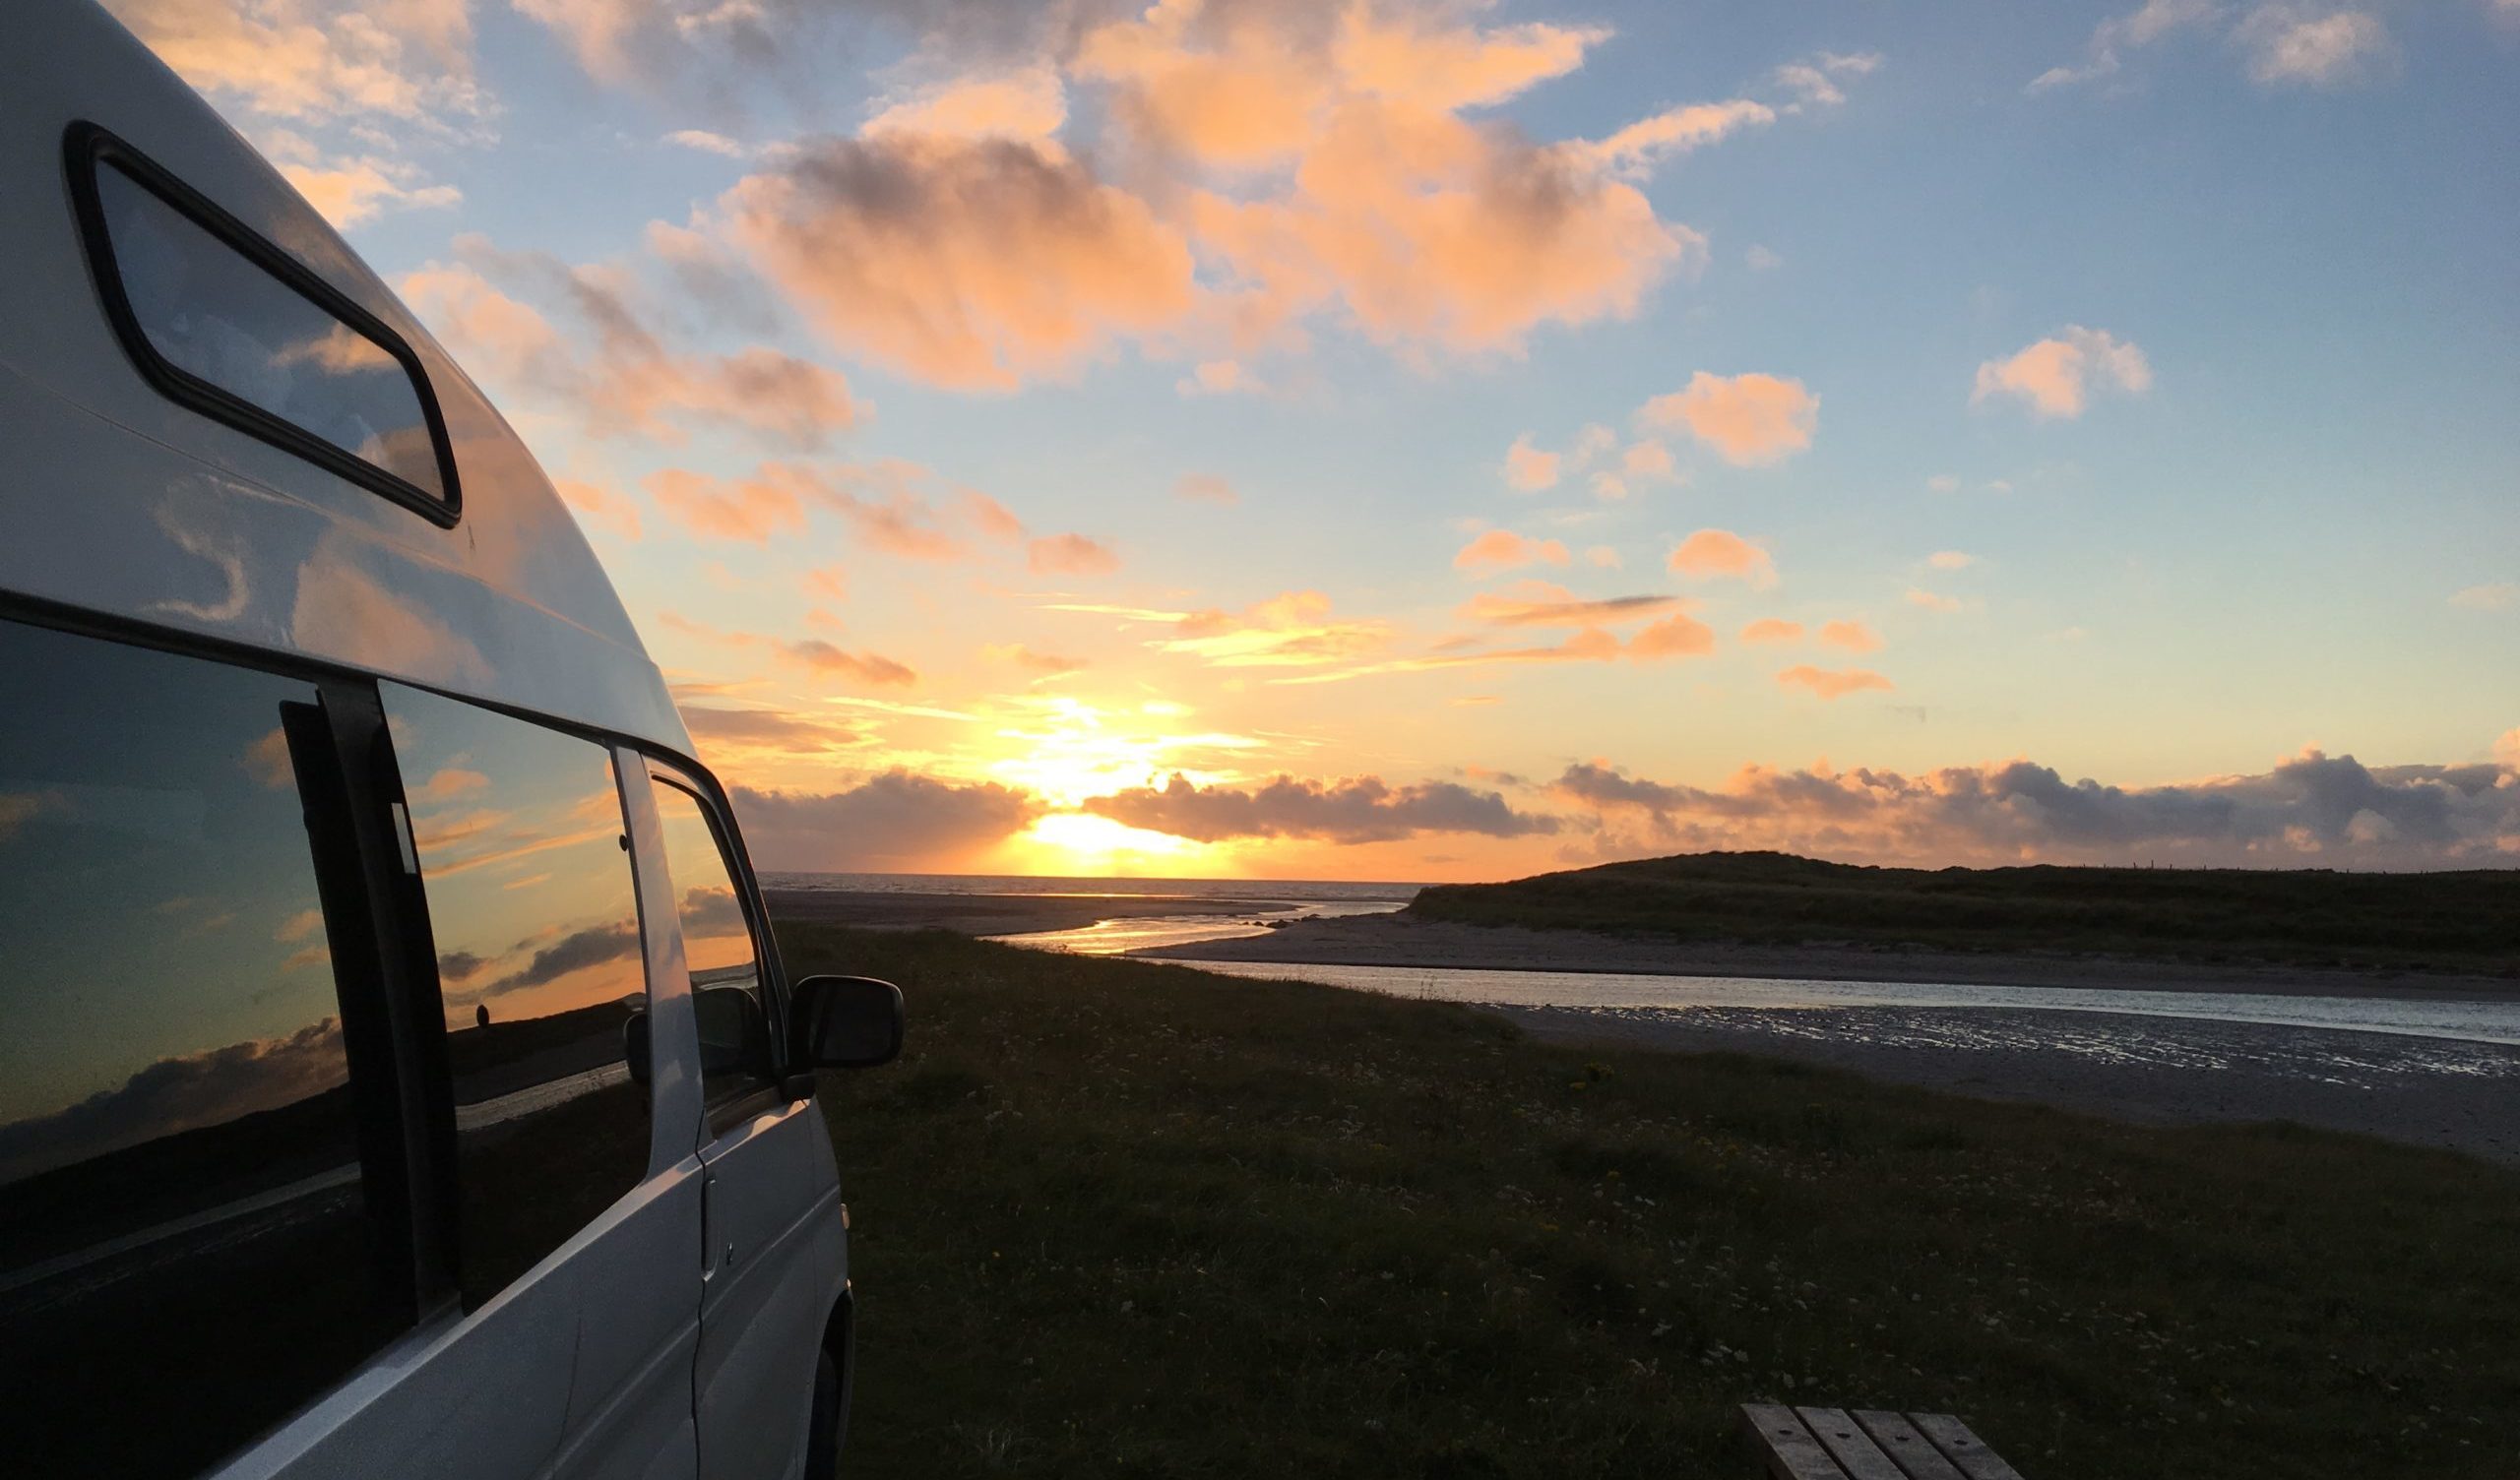 Rachel would love to be back here with her Bongo on South Uist, watching the sunset. #TouringDreams